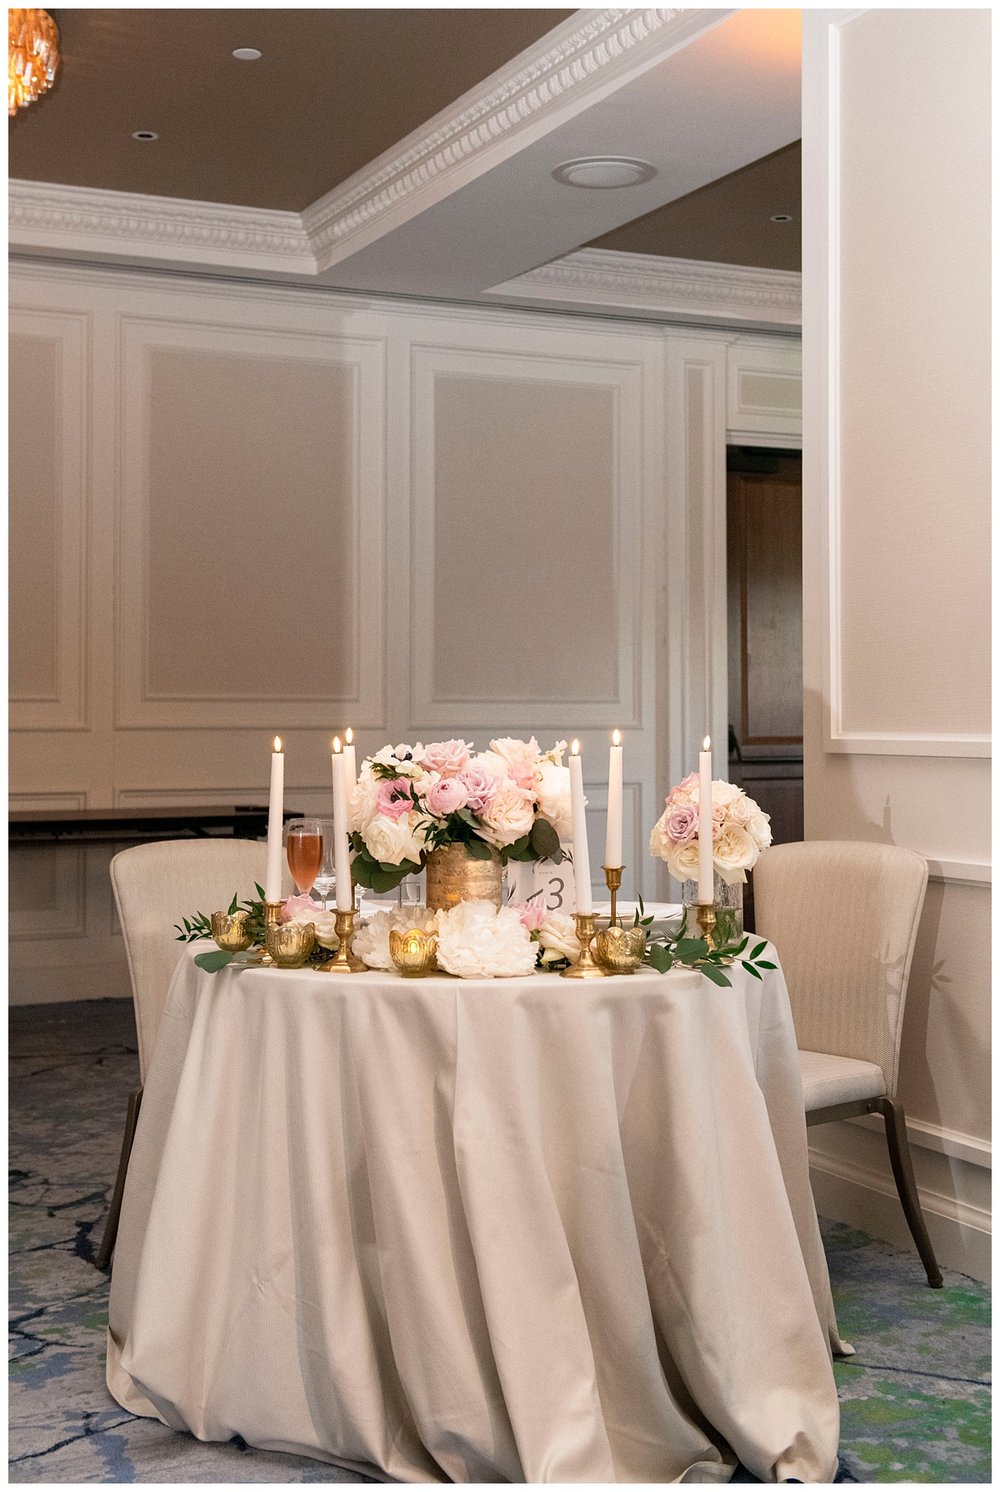 sweetheart table at Boston wedding reception with white linen